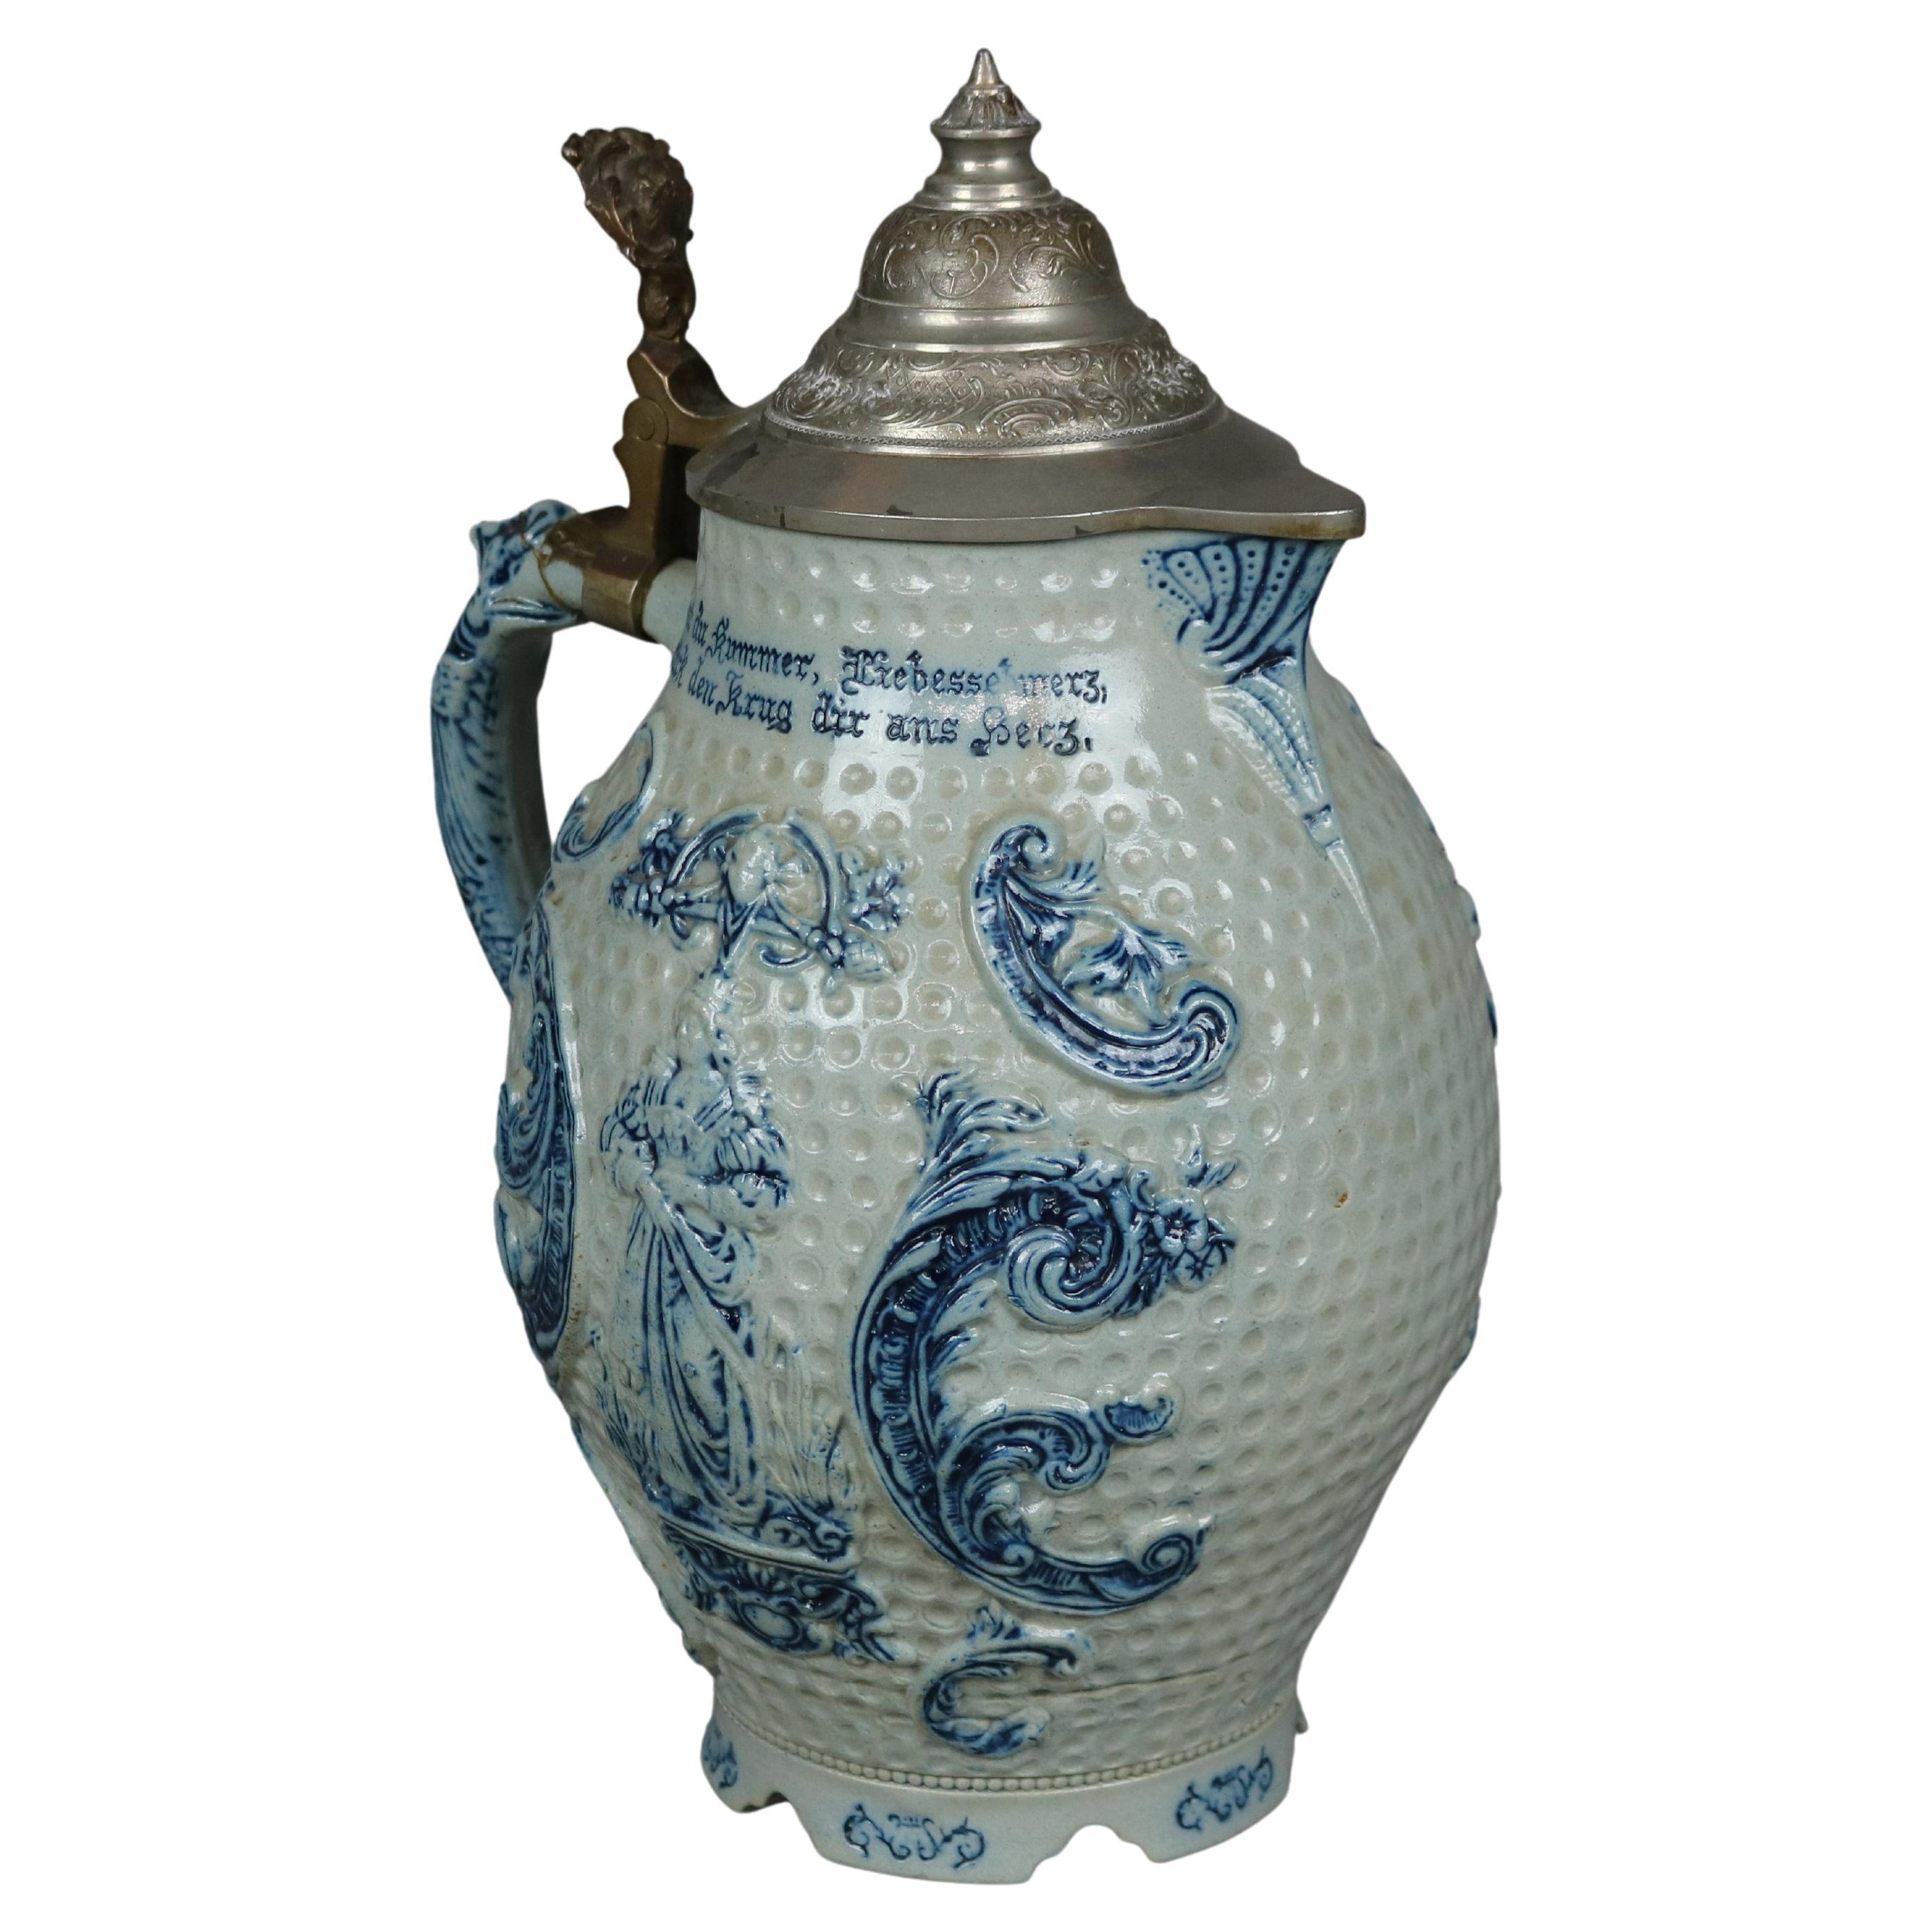 An antique German blue decorated beer stein offers dimpled stoneware construction with female figures, verbiage, hinged pewter lid and non-working music box, c1900

Measures- 13''H X 8.5''W X 8.5''D.

Catalogue Note: Ask about DISCOUNTED DELIVERY